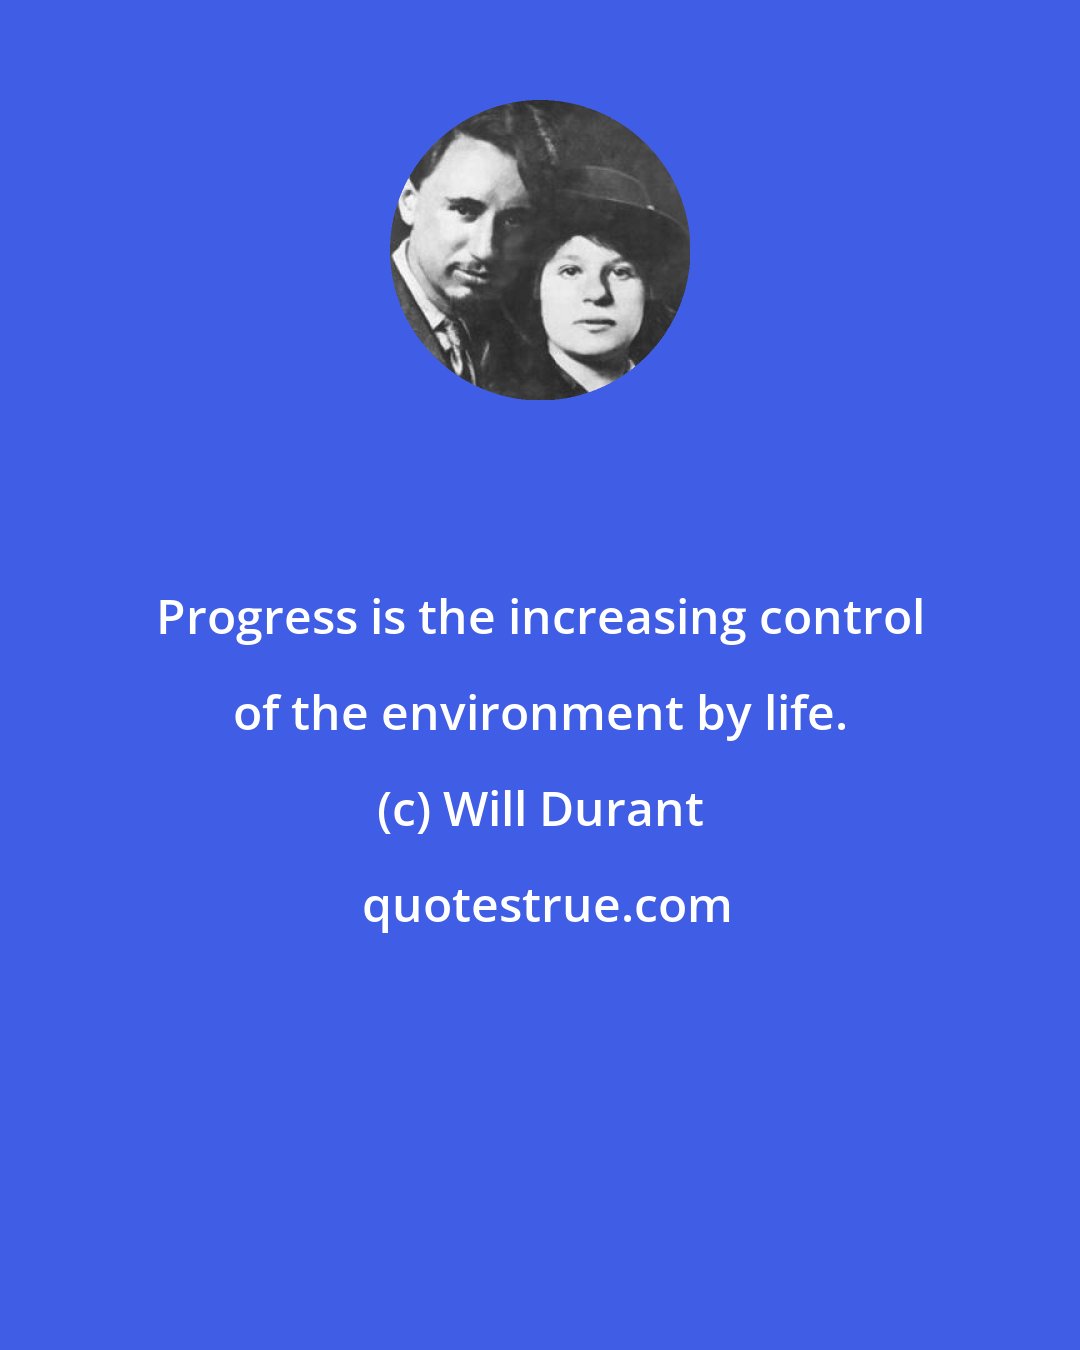 Will Durant: Progress is the increasing control of the environment by life.